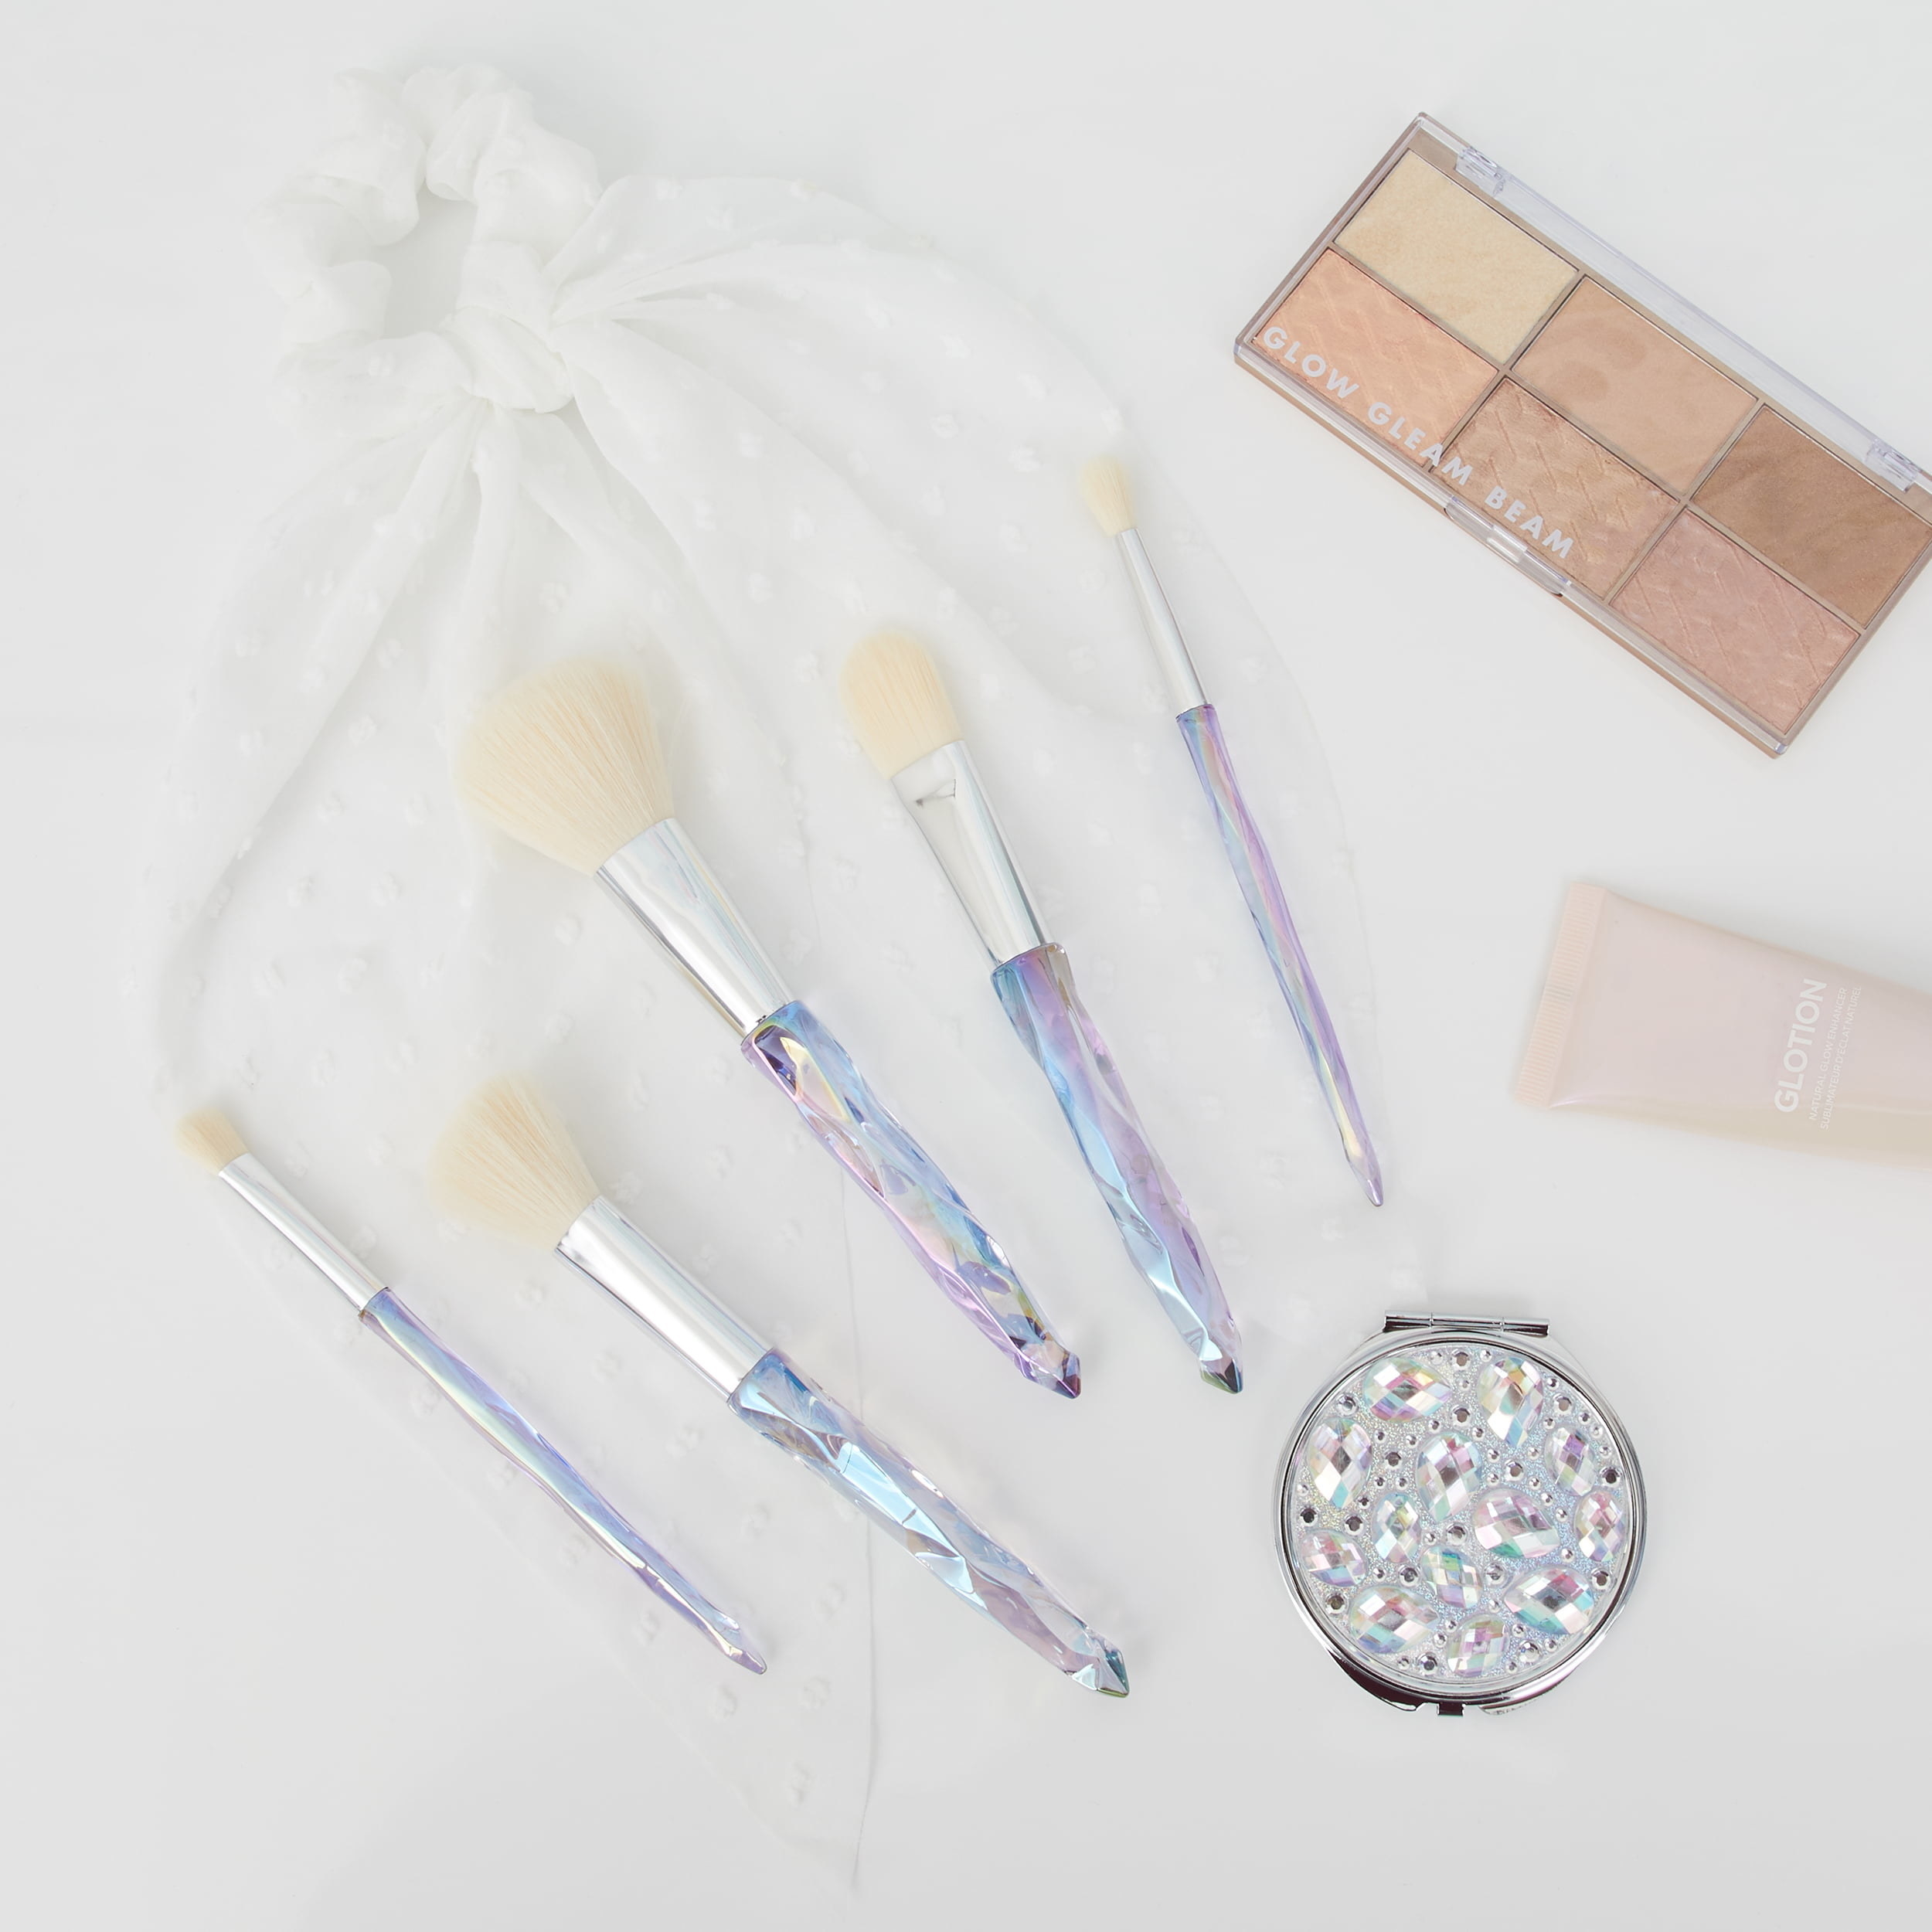 the makeup brush and mirror set that has pastel iridescent colors